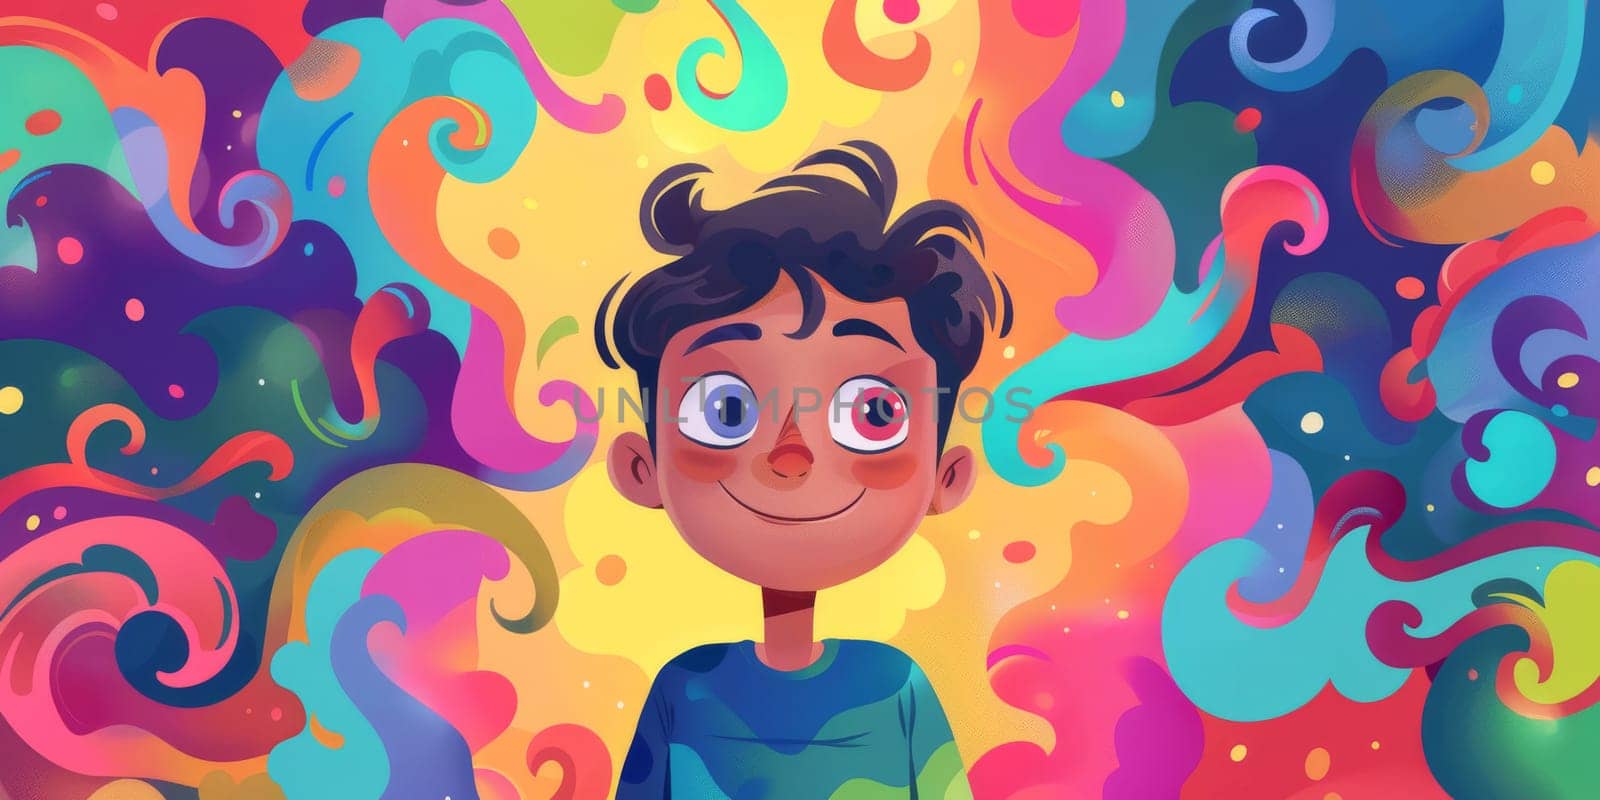 Cartoon kid with ADHD syndome on colorful background by Kadula